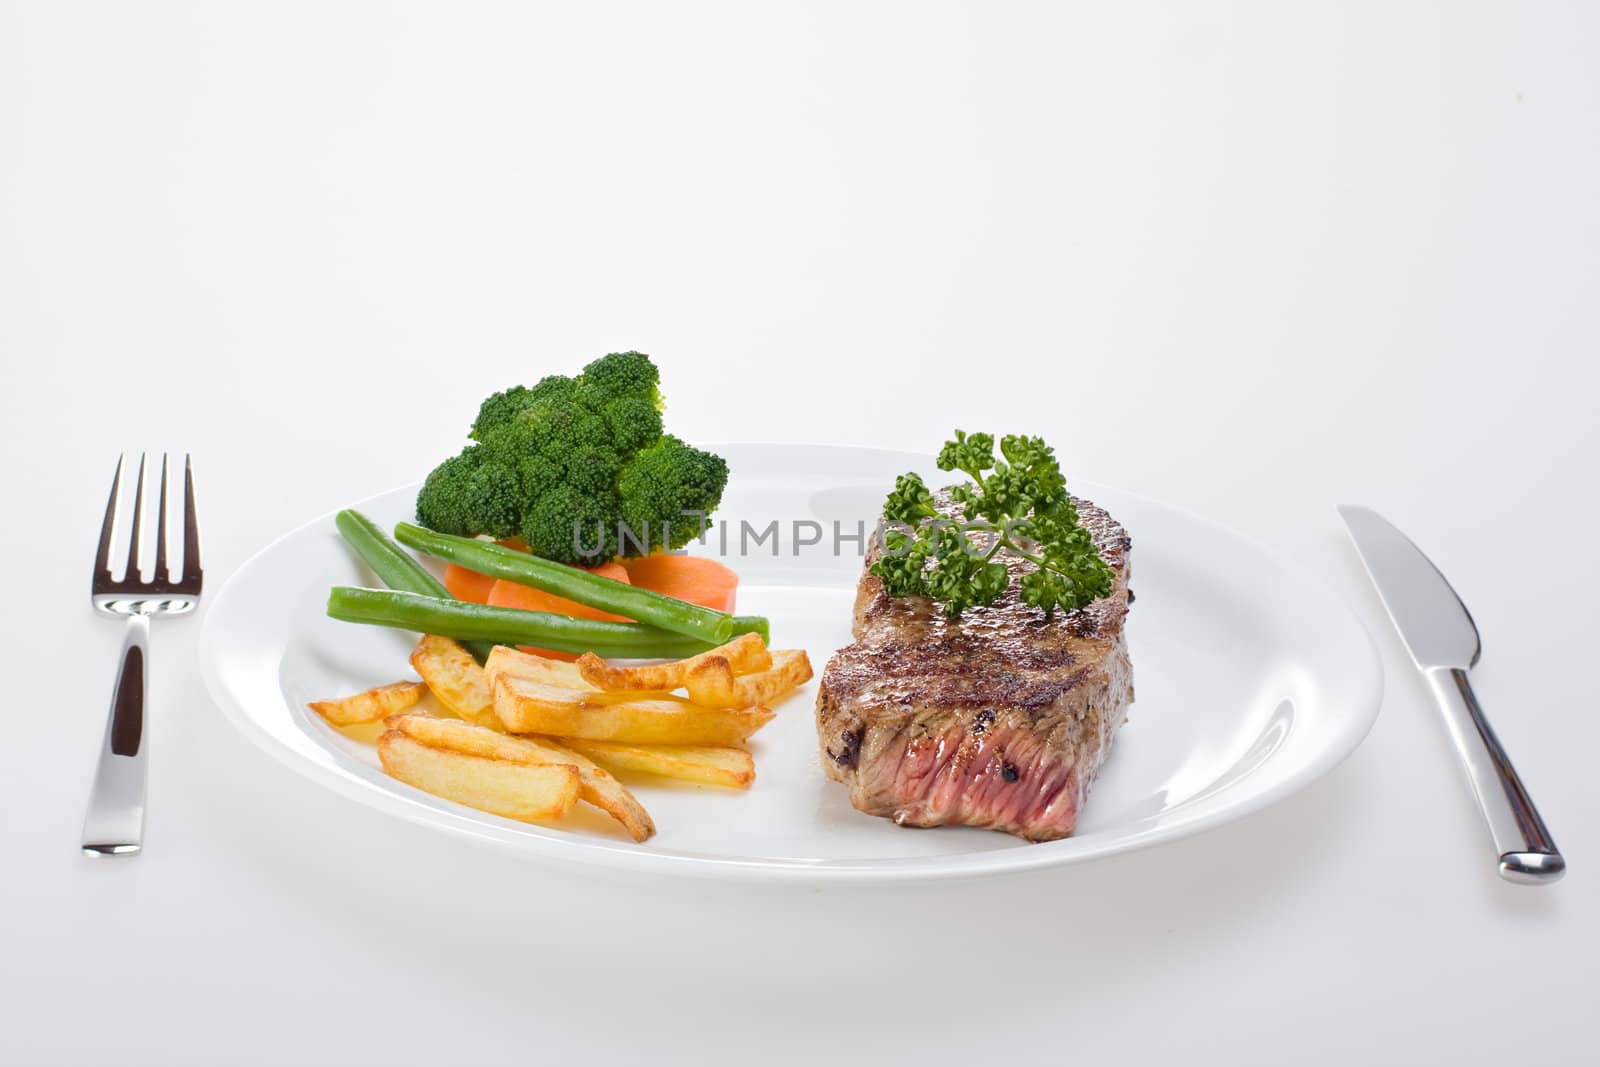 grilled steak on a plate with fries